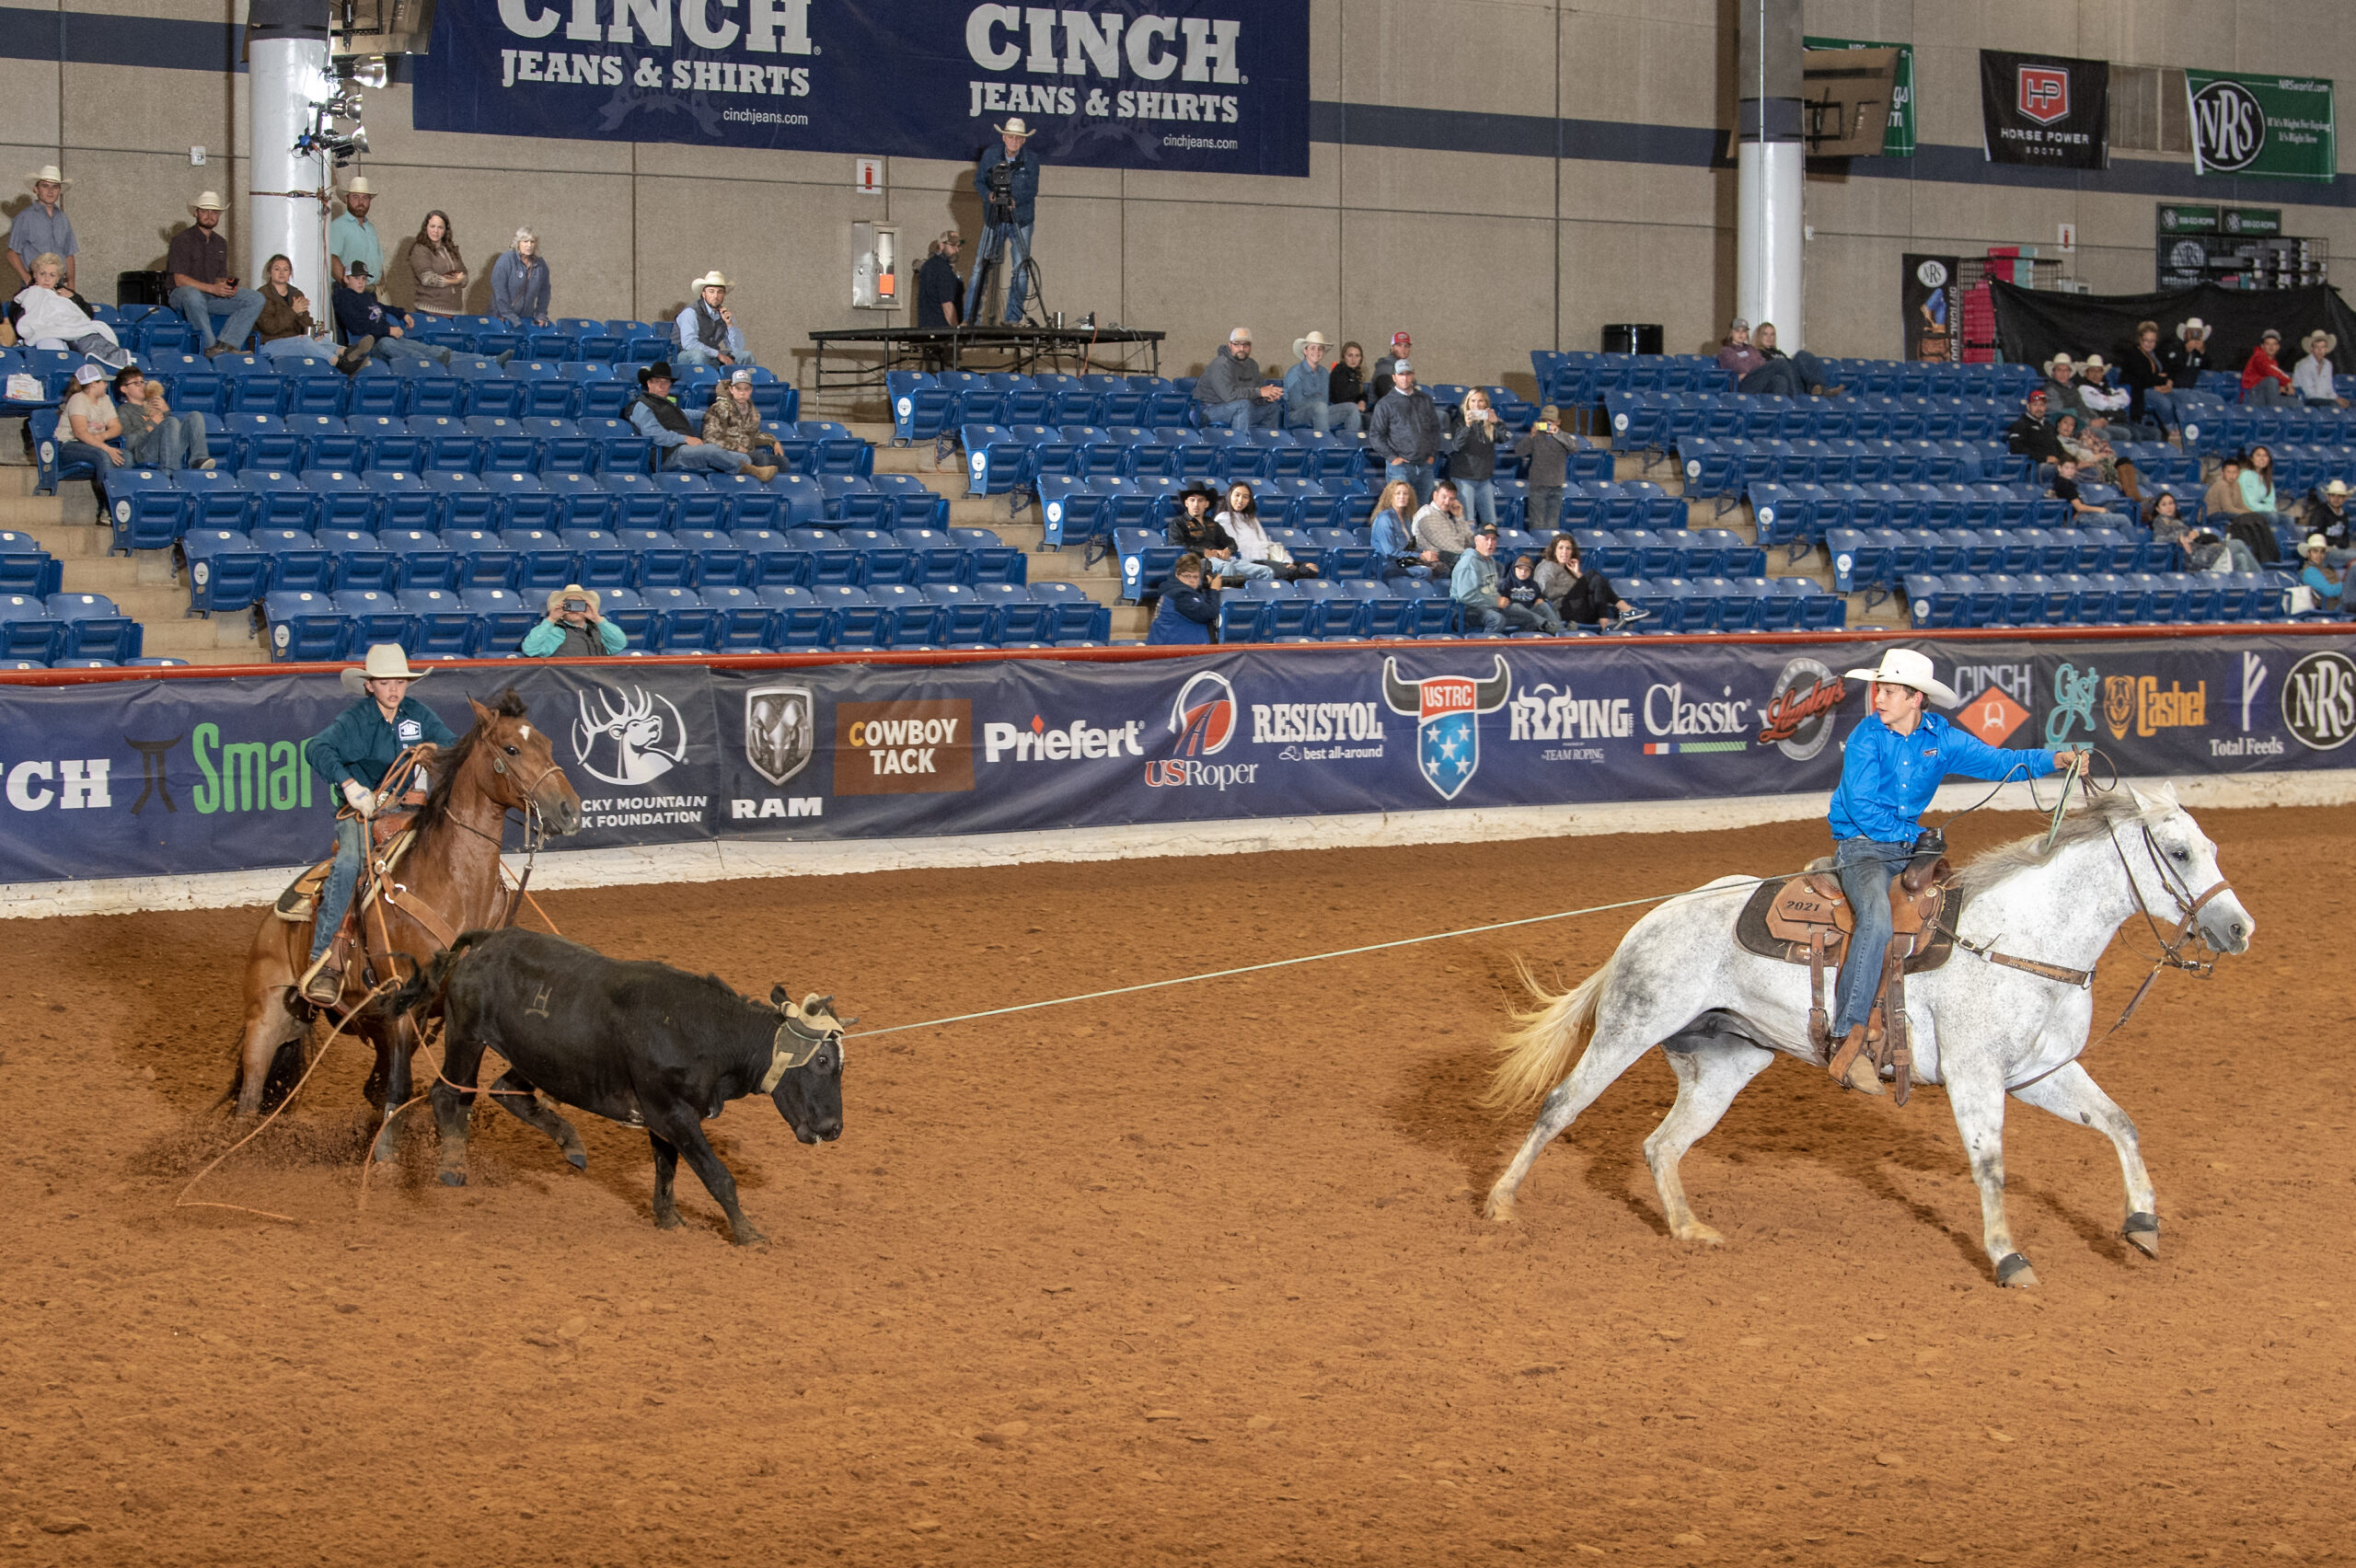 Cade Ward and Ryder Davis roping their steer in the Classic Equine #8.5 Shootout.